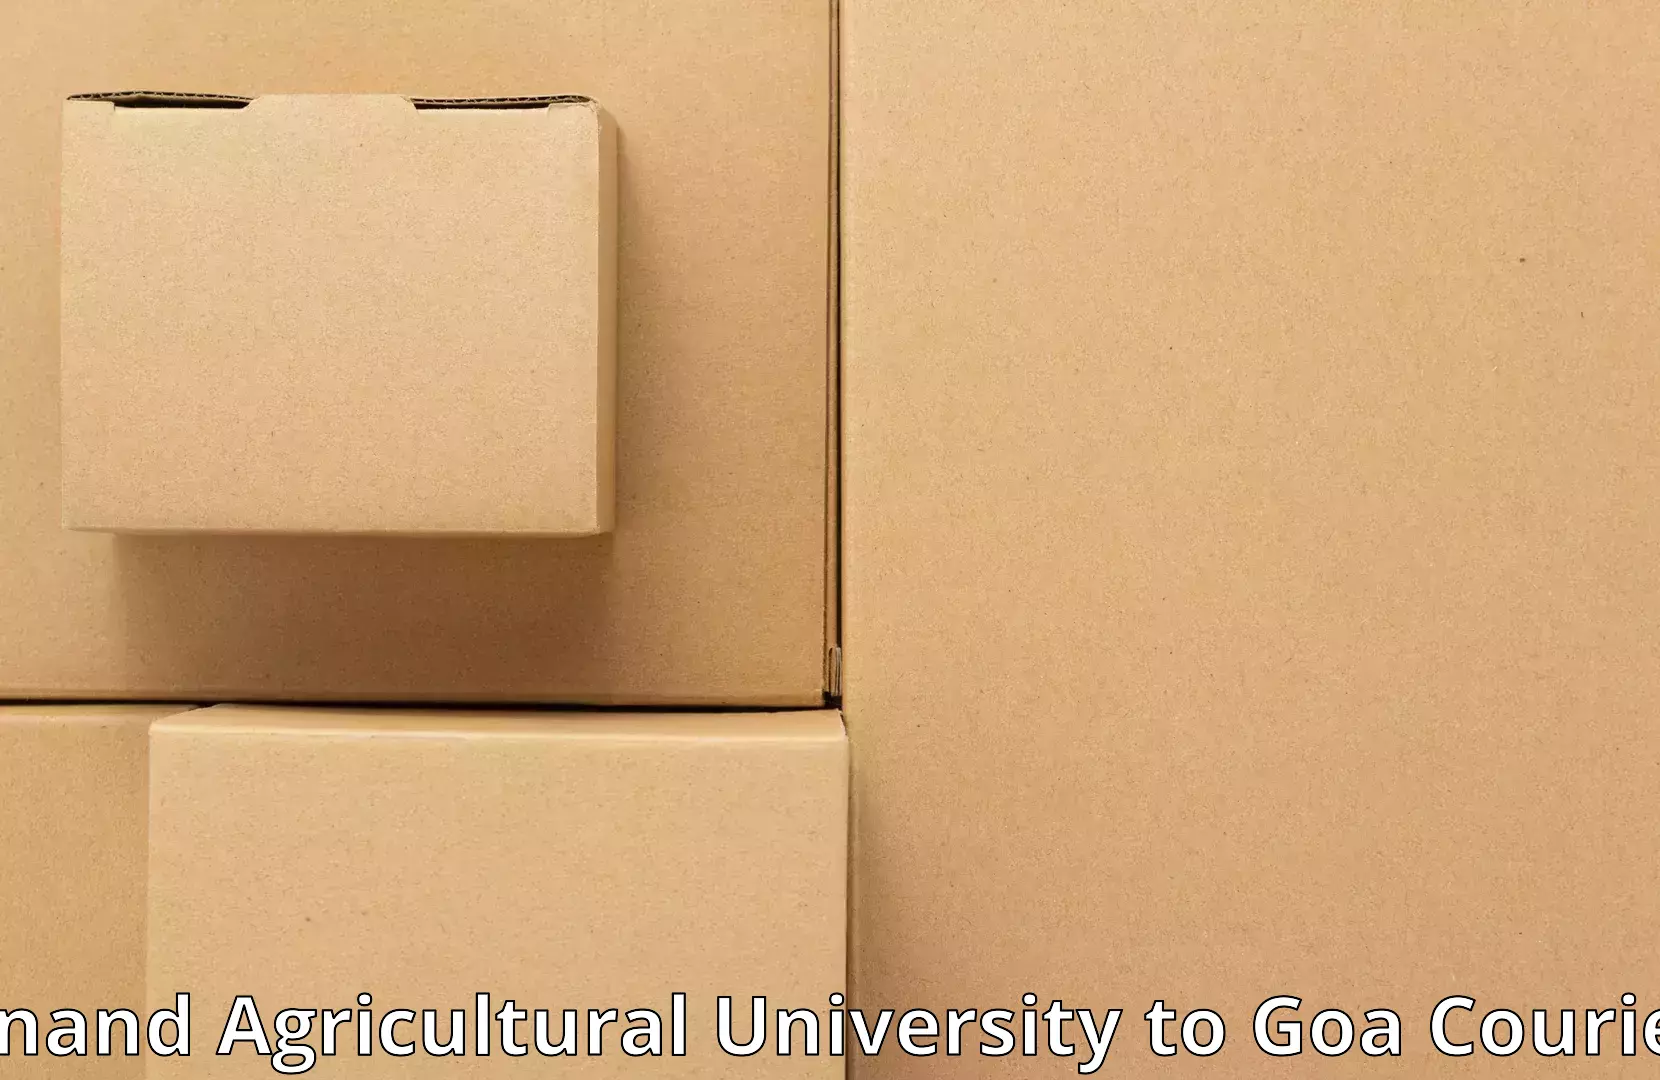 Packing and moving services Anand Agricultural University to Panjim